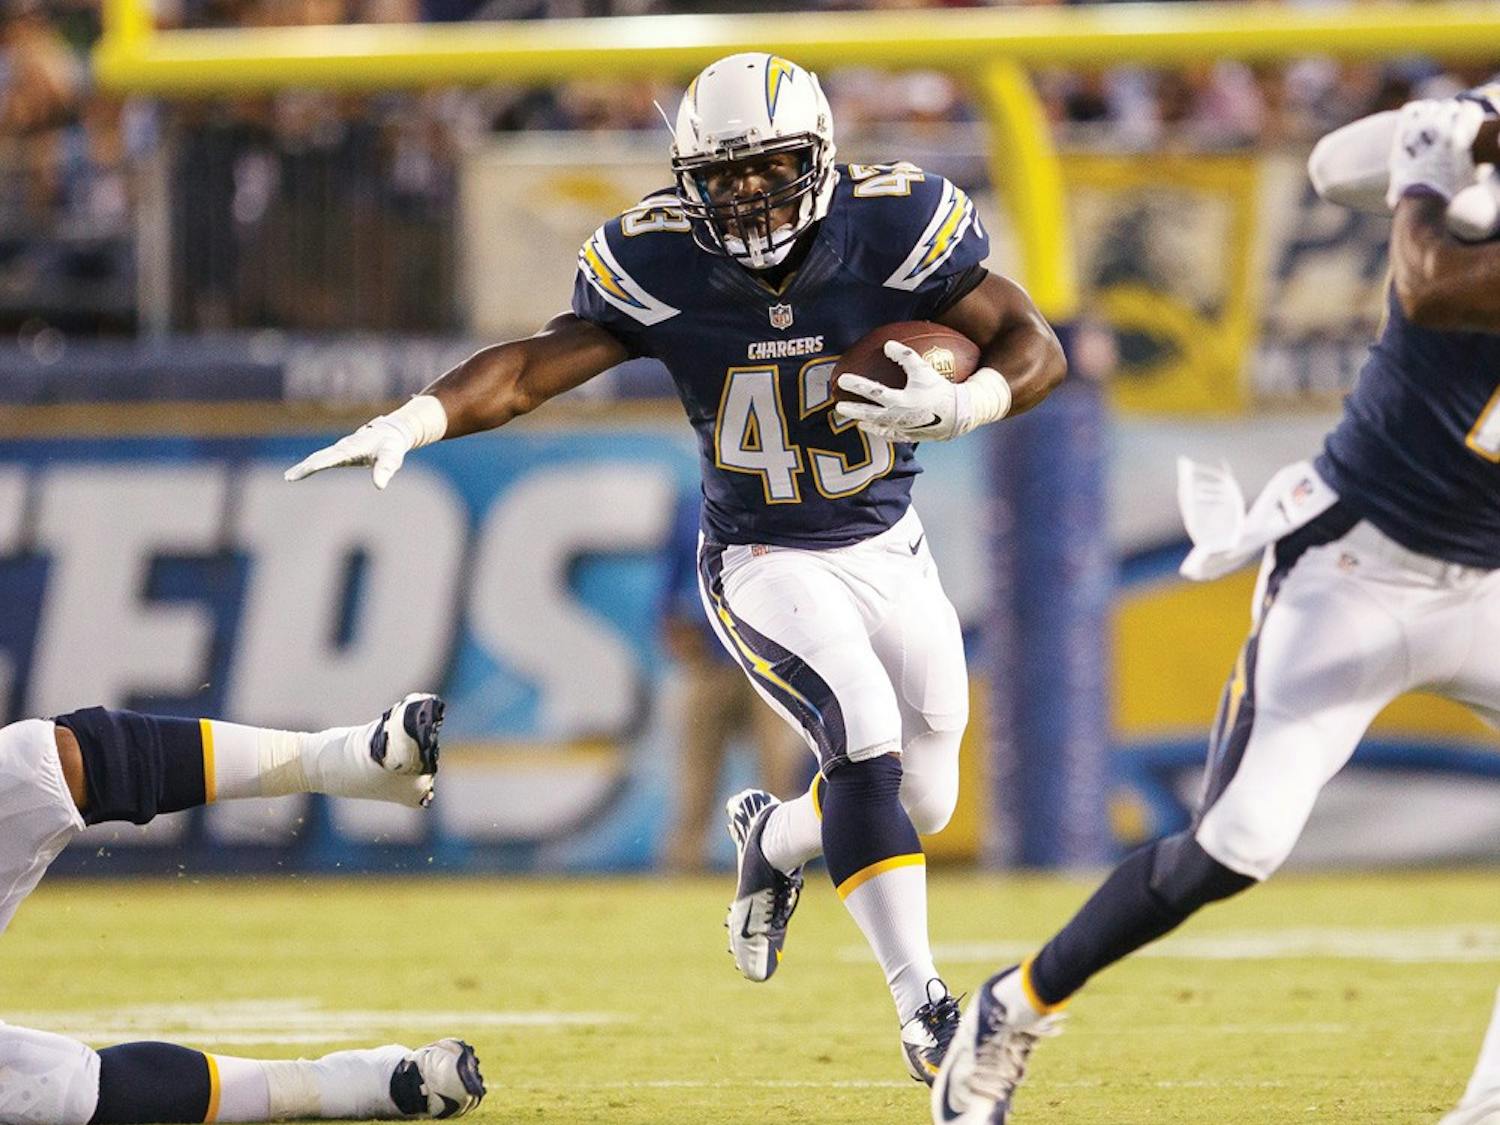 Branden Oliver runs the ball for a touchdown earlier this season for&nbsp;the San Diego Chargers. The former UB running back has been successful in the NFL.